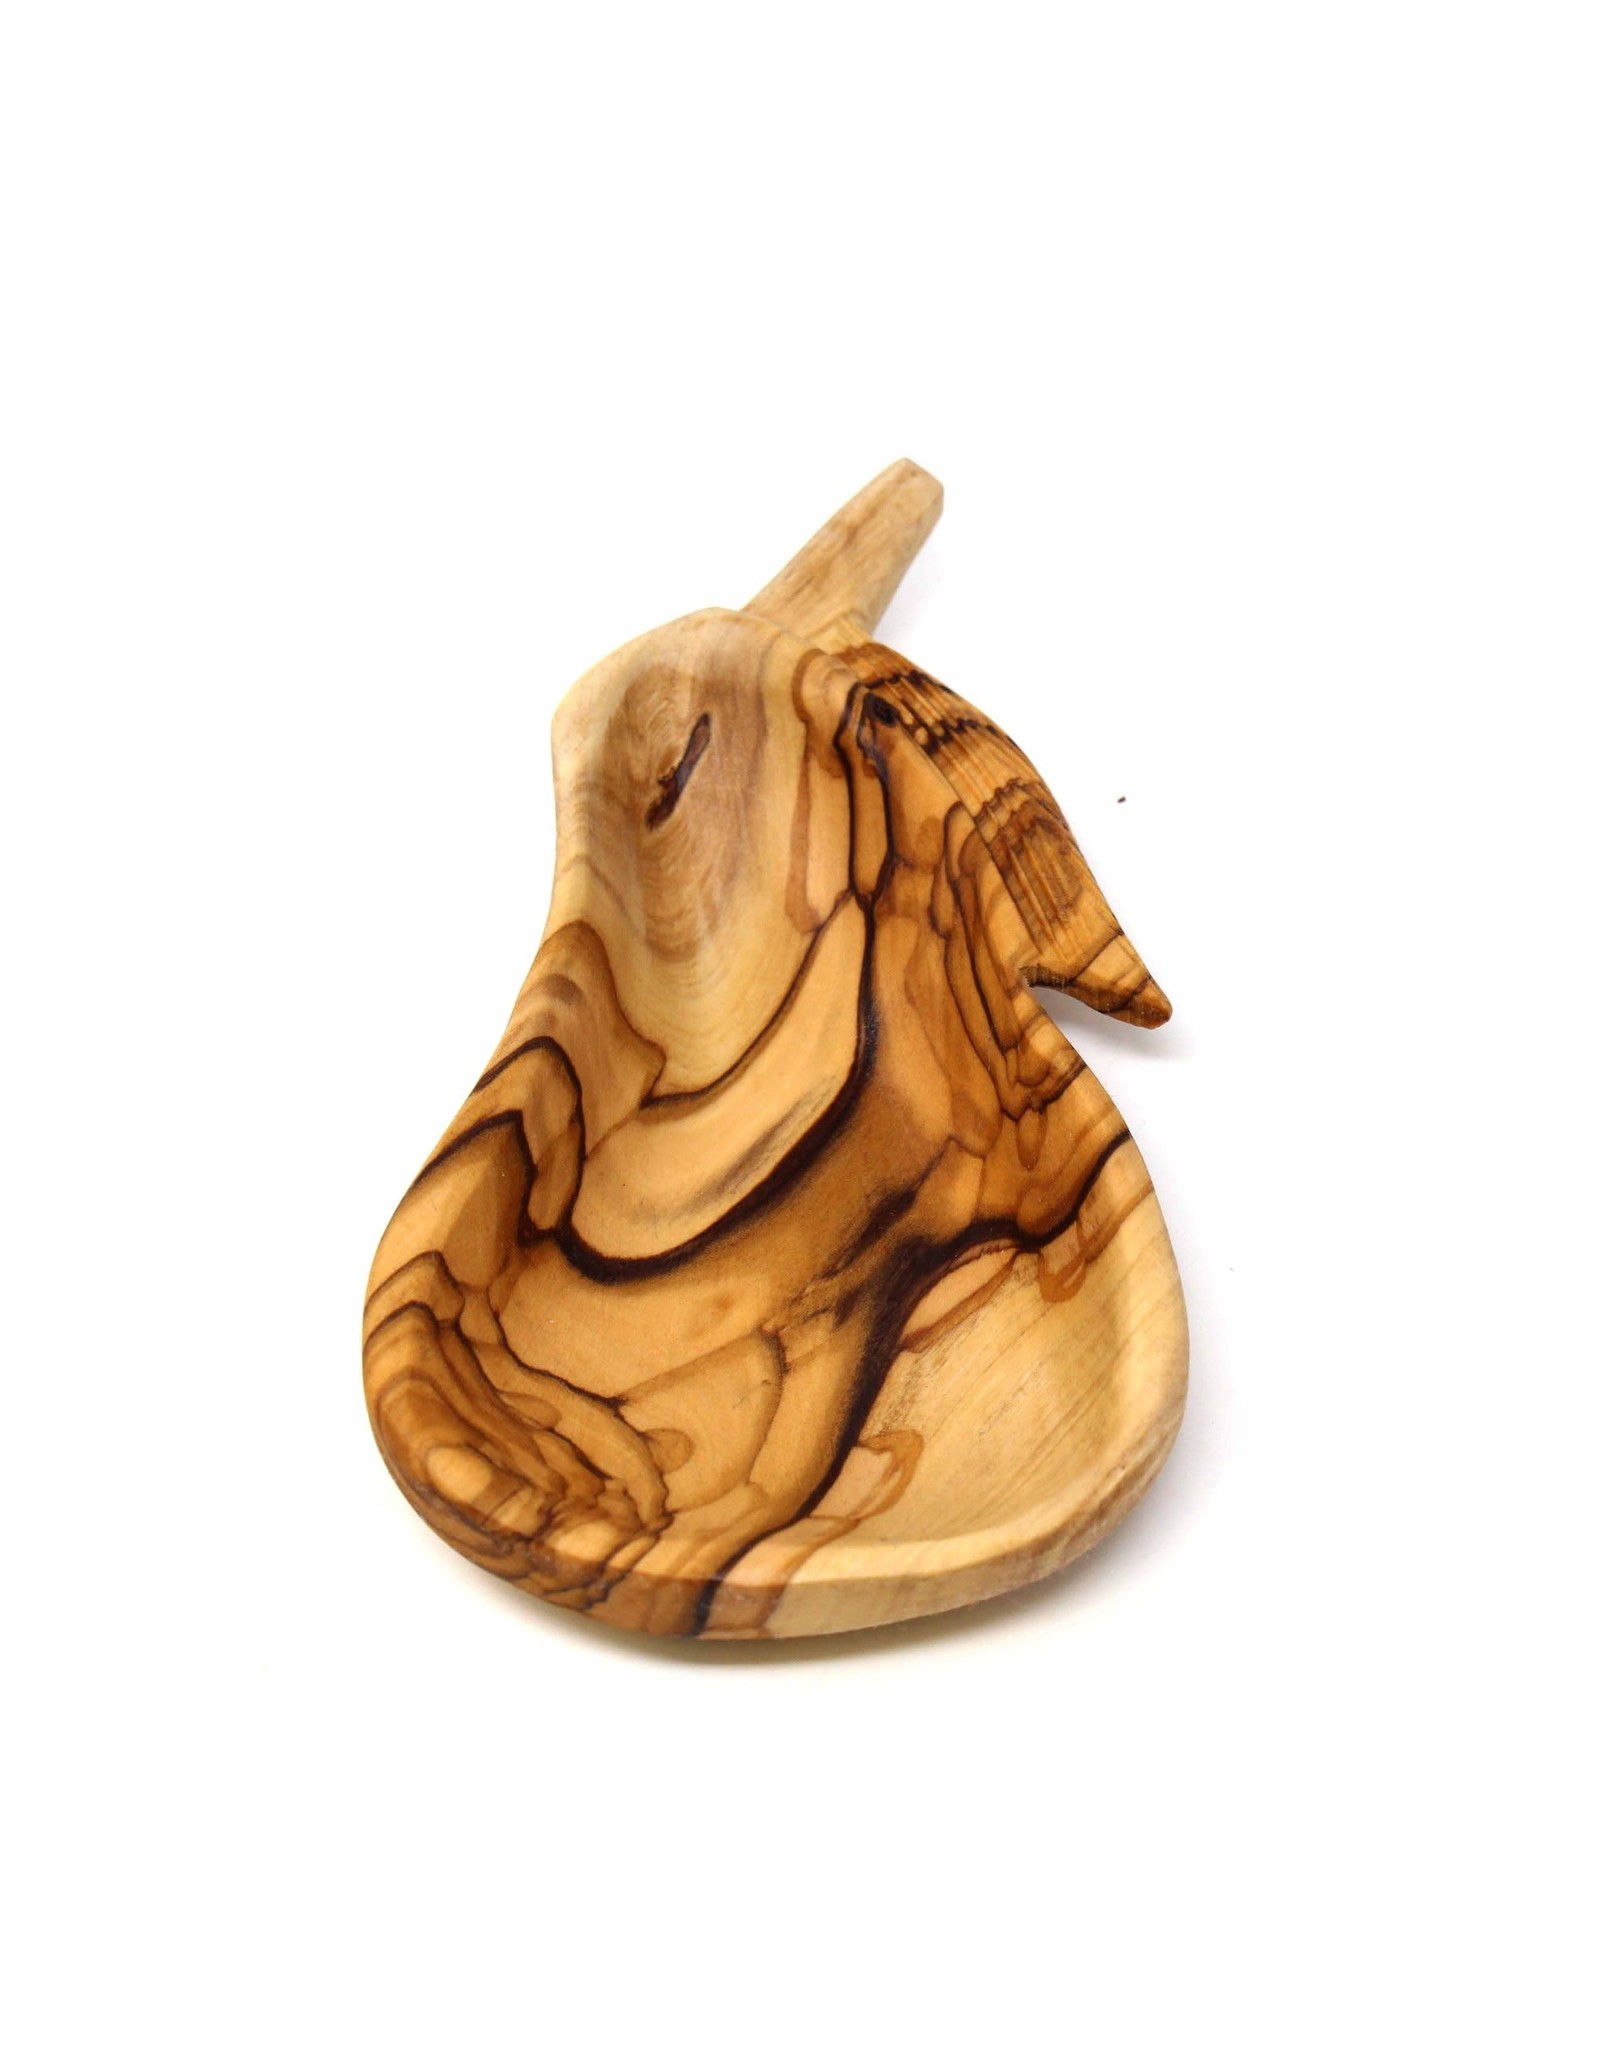 Small Olive Wood Plate, Pear Shape